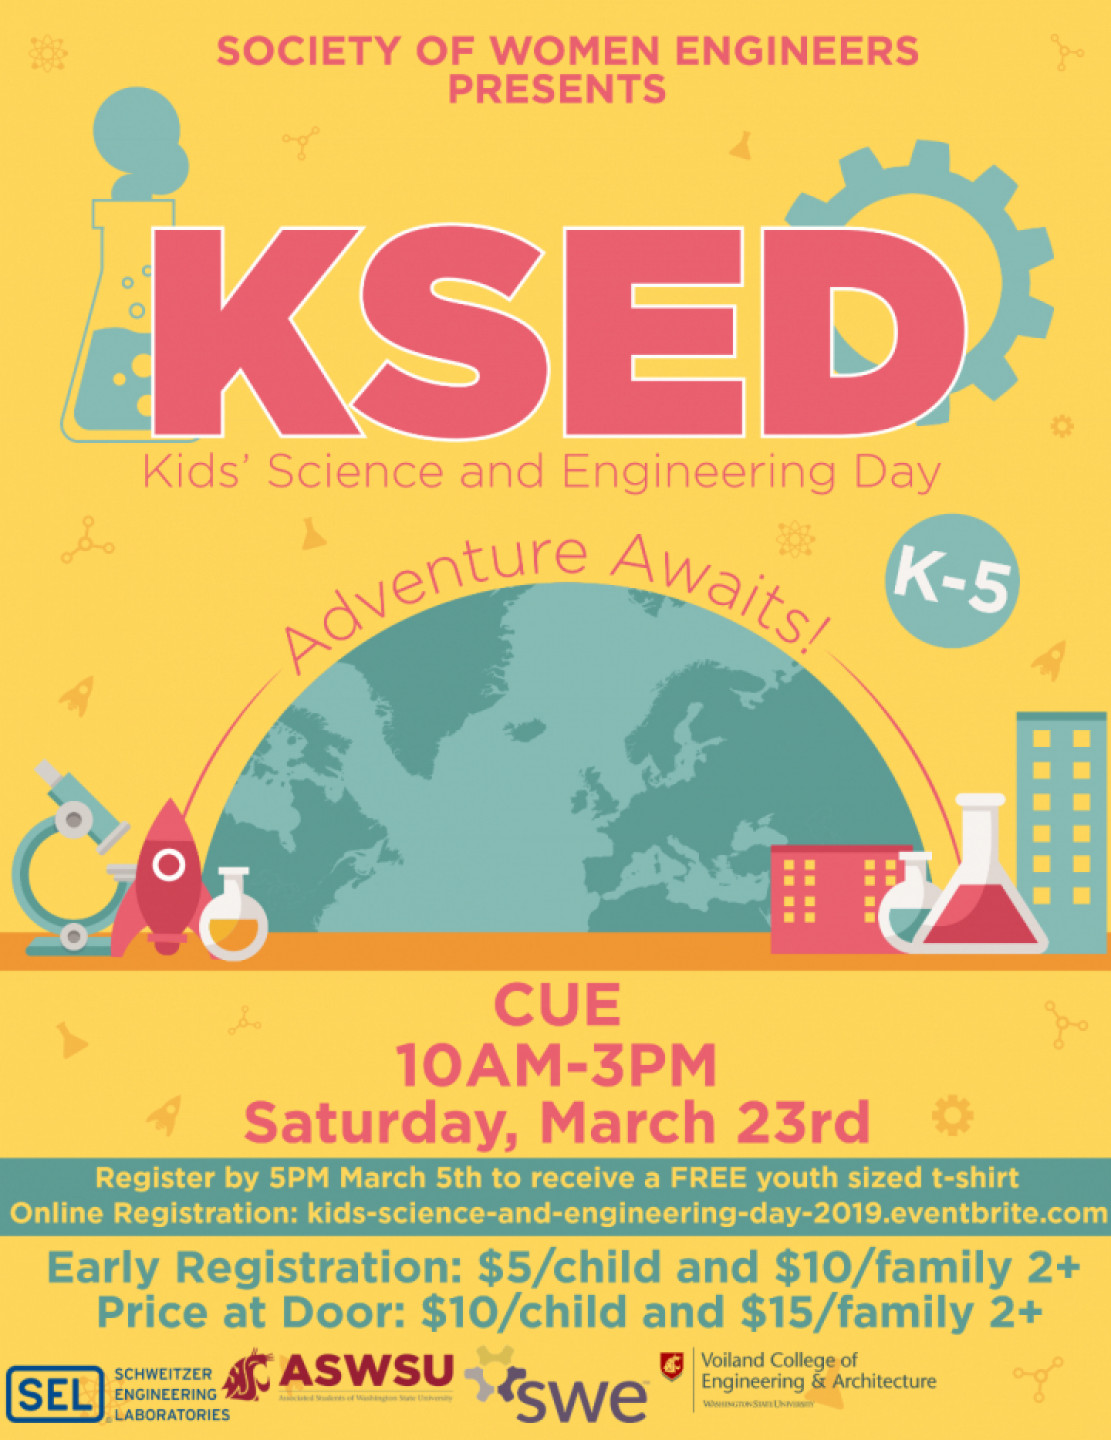 Kids' Science and Engineering Day